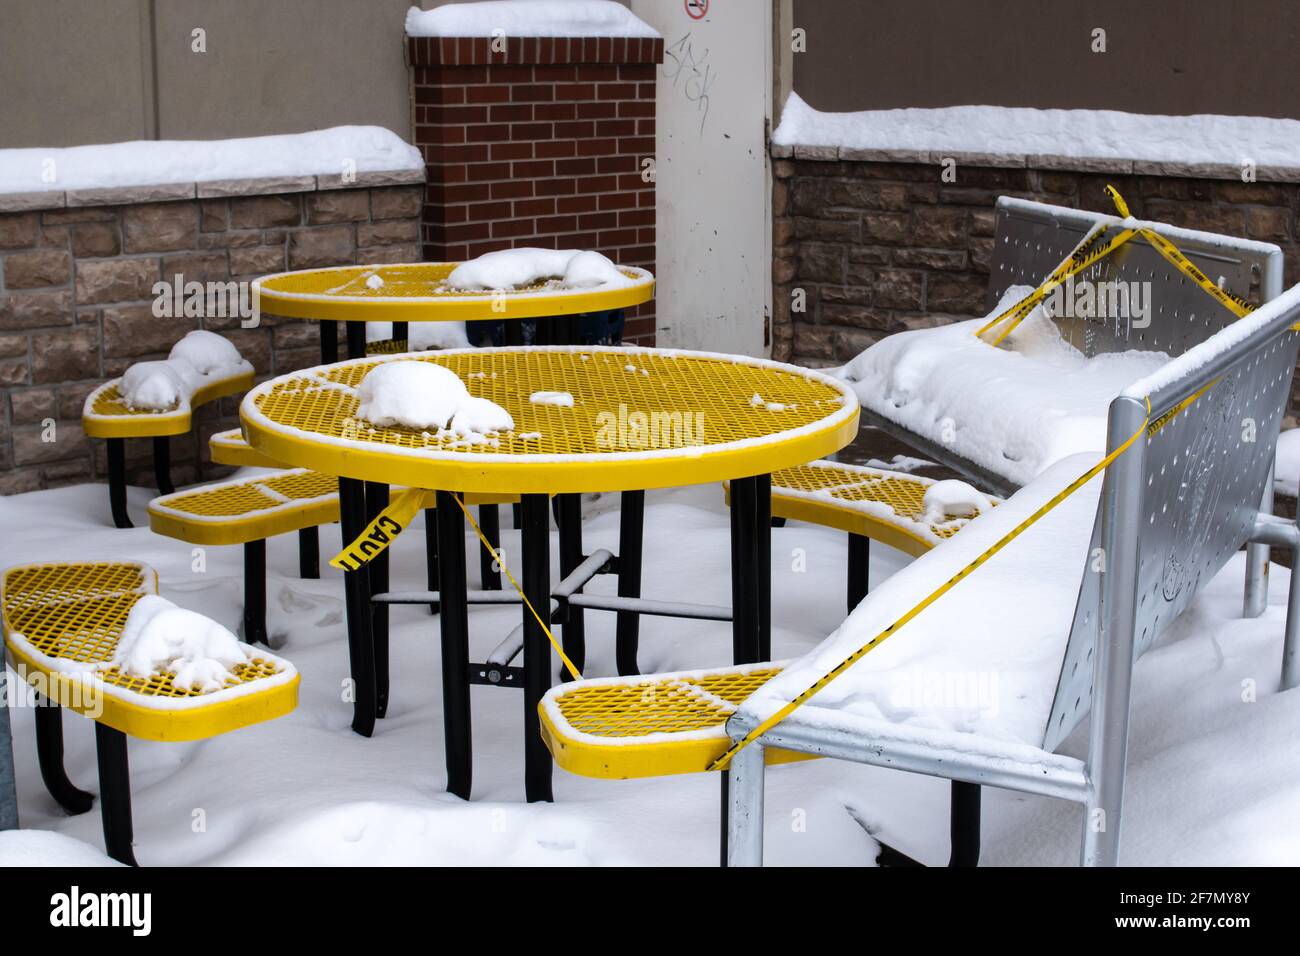 London, Ontario, Canada - February 15 2021: A yellow metal grill table with benches outside a Marble slab creamery in London sits covered in snow. Stock Photo